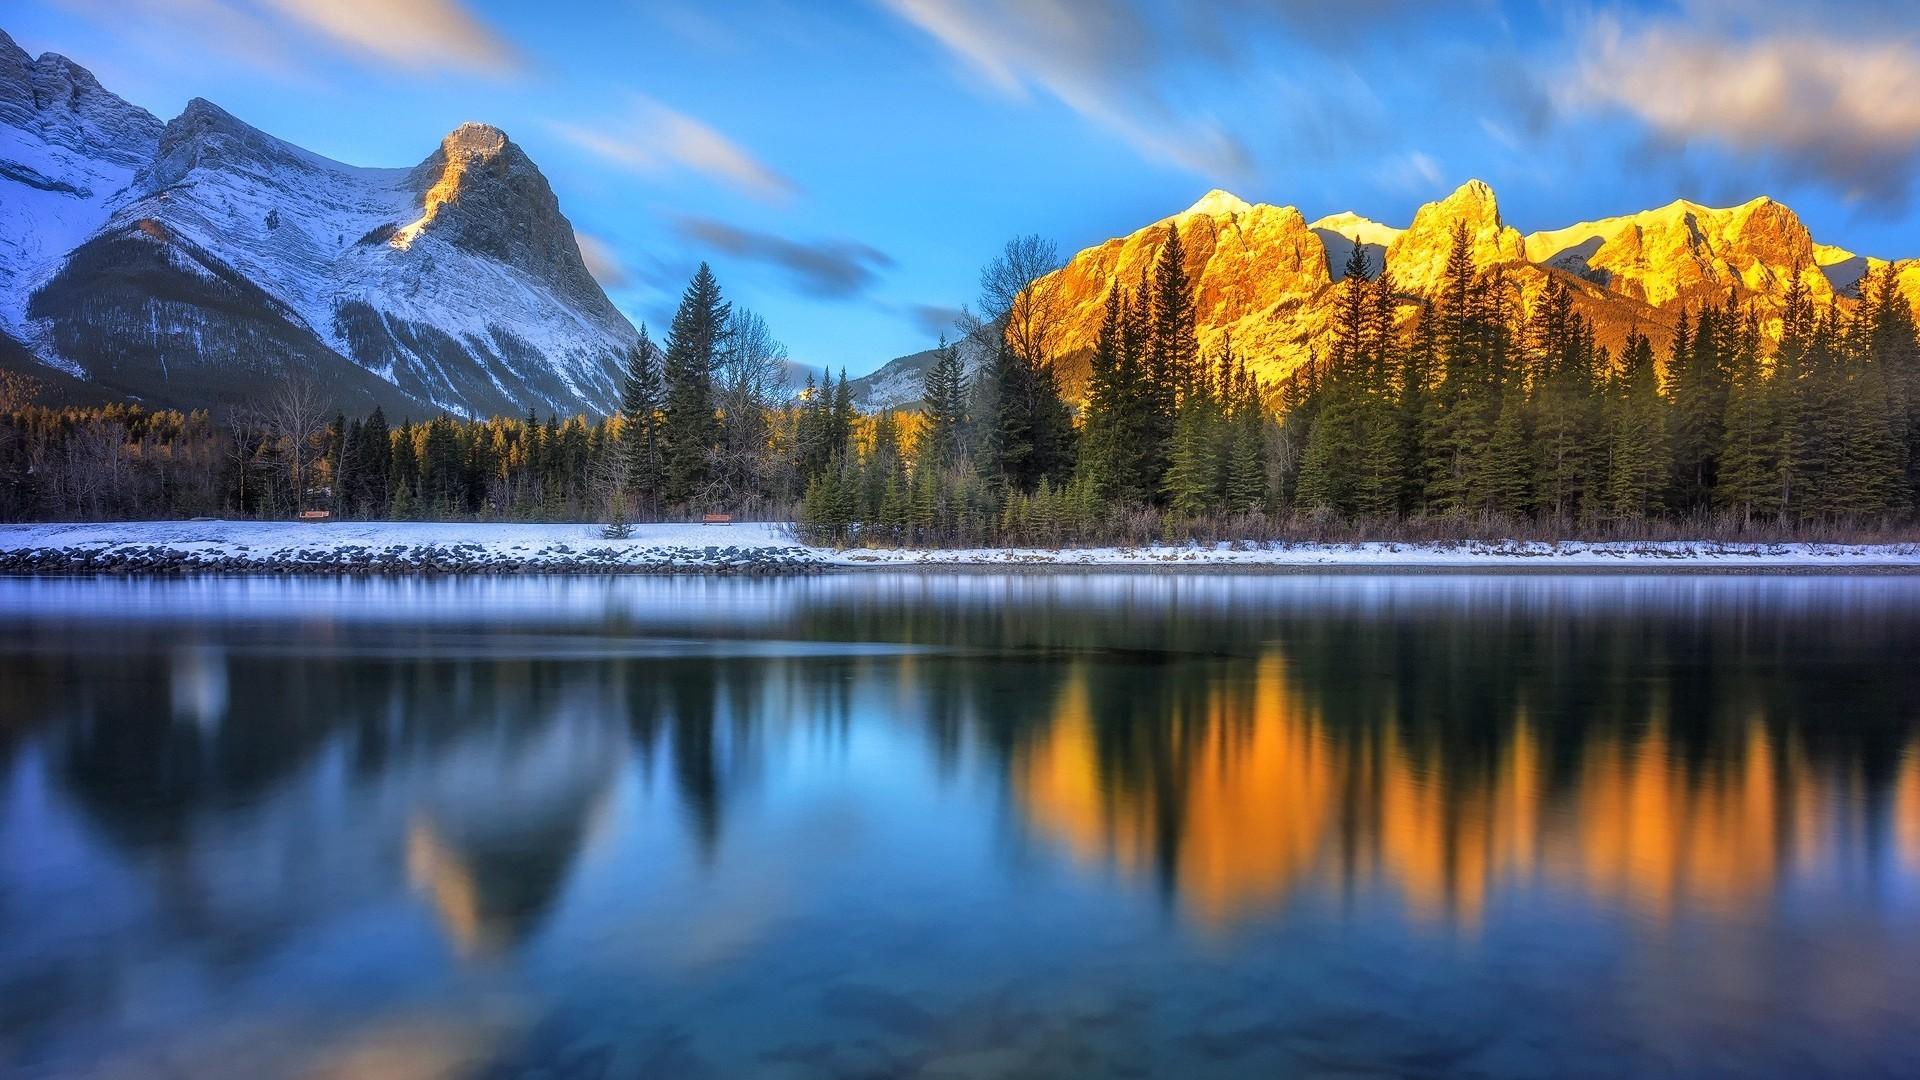 Download 1920x1080 Canada, Mountain, Lake, Reflection, Trees